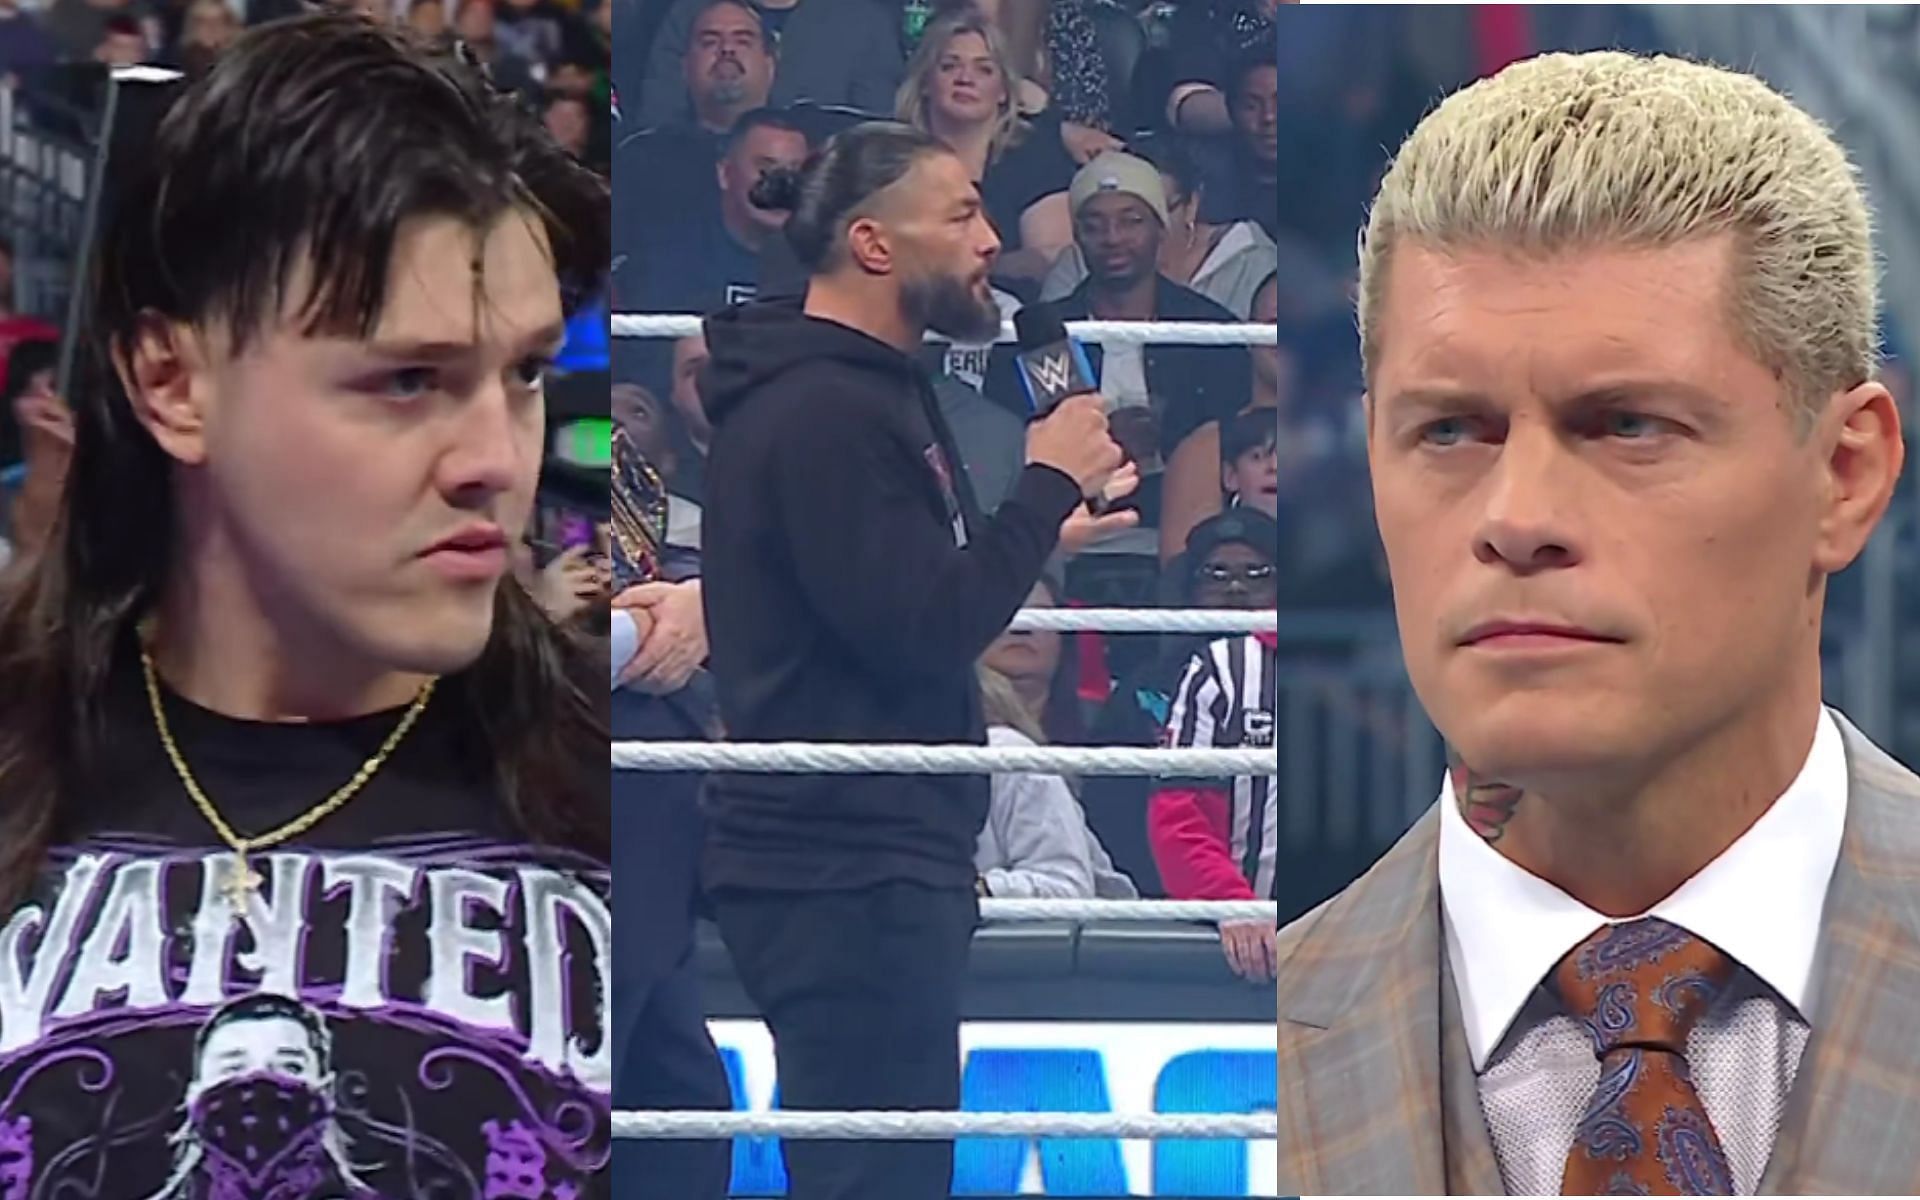 Dominik Mysterio, Roman Reigns and Cody Rhodes during SmackDown (Image source: WWE)